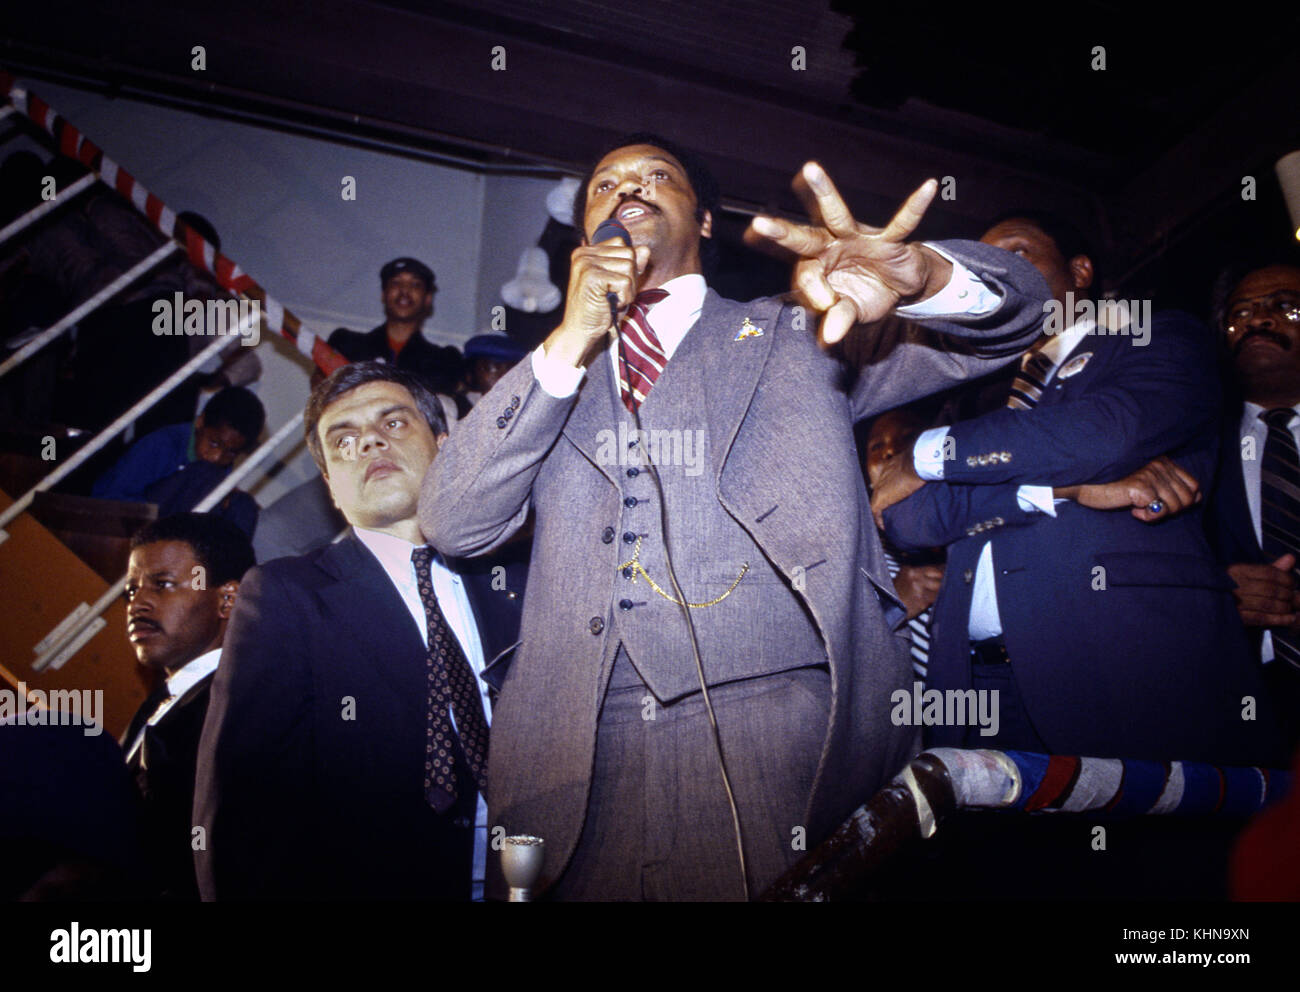 Jesse Jackson campaigns during his 1984 bid for President of the United States. On November 3, 1983, Jackson announced his campaign for President of the United States in the 1984 election,becoming the second African American to mount a nationwide campaign for president. In the Democratic Party primaries, Jackson, who had been written off by pundits as a fringe candidate with little chance at winning the nomination, surprised many when he took third place behind Senator Gary Hart and former Vice President Walter Mondale, who eventually won the nomination. Stock Photo